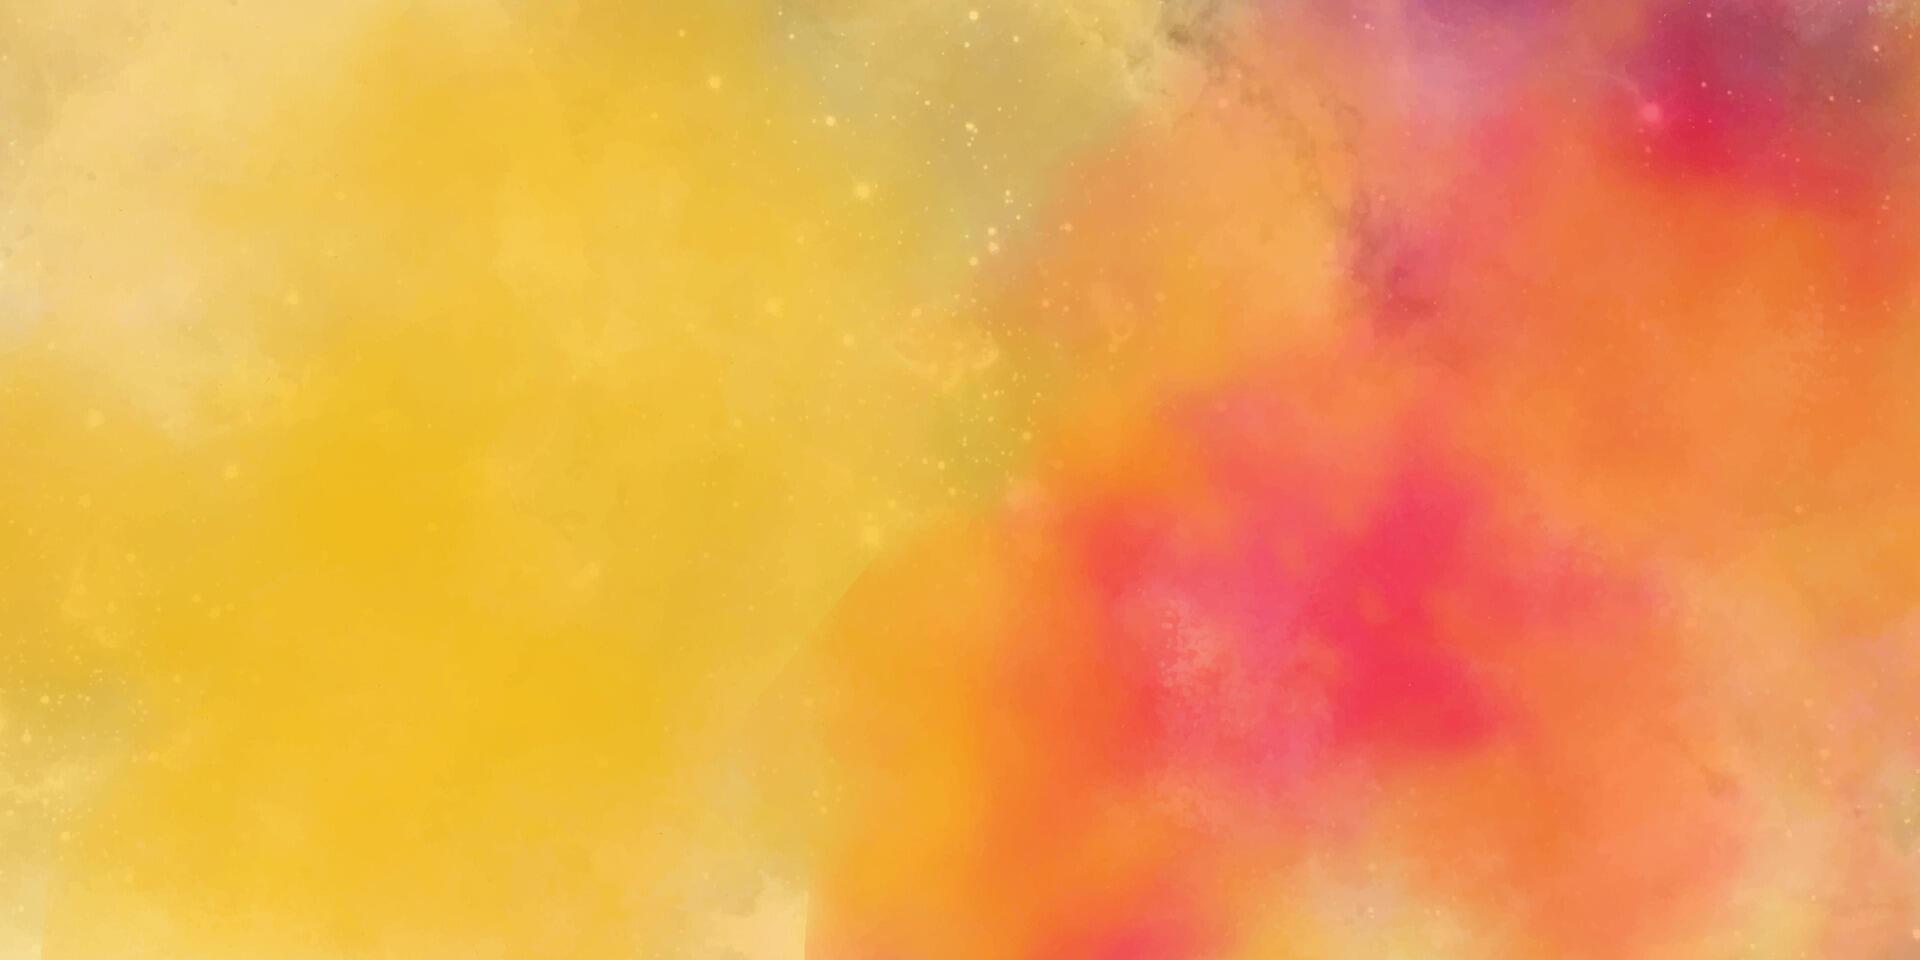 Abstract colorful background with drops. Watercolor background with space. Colorful sunrise or sunset colors. Orange red and yellow background vector